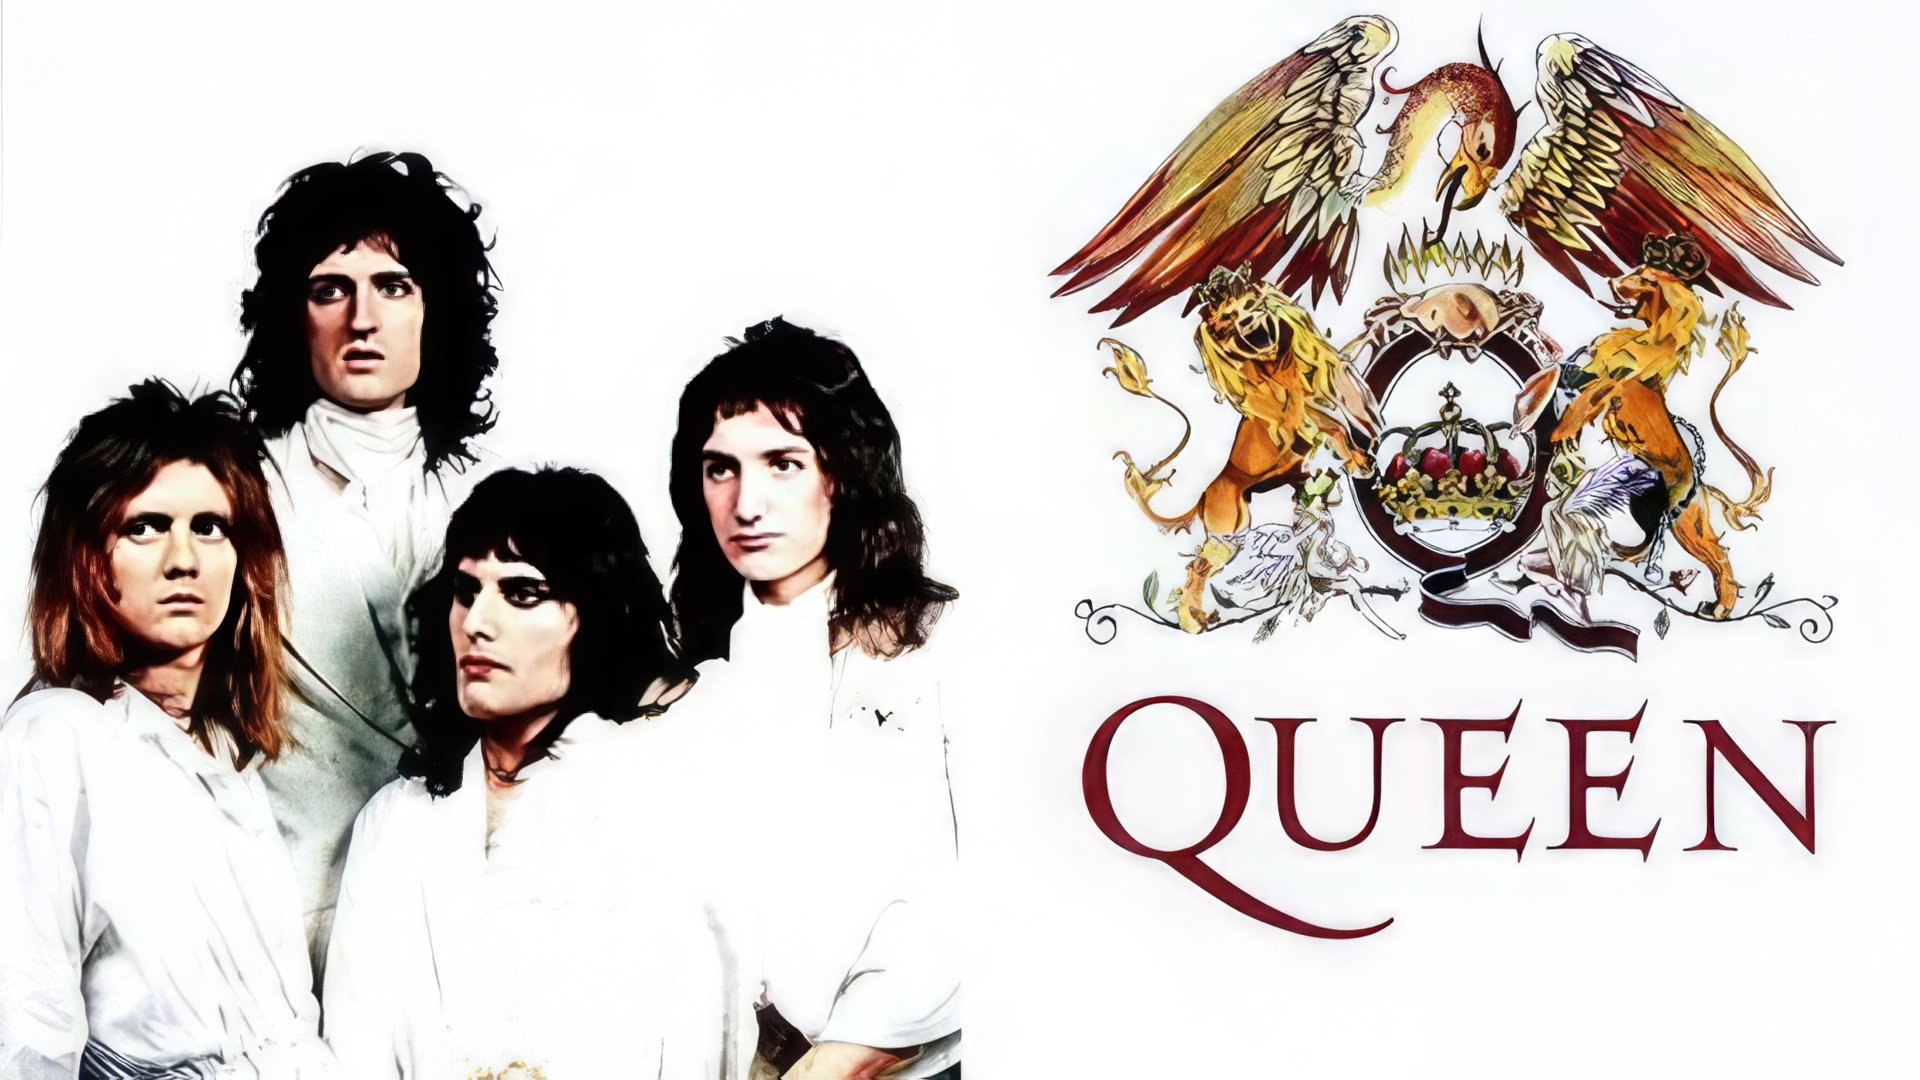 Freddie Mercury invented the emblem for the band 'Queen'